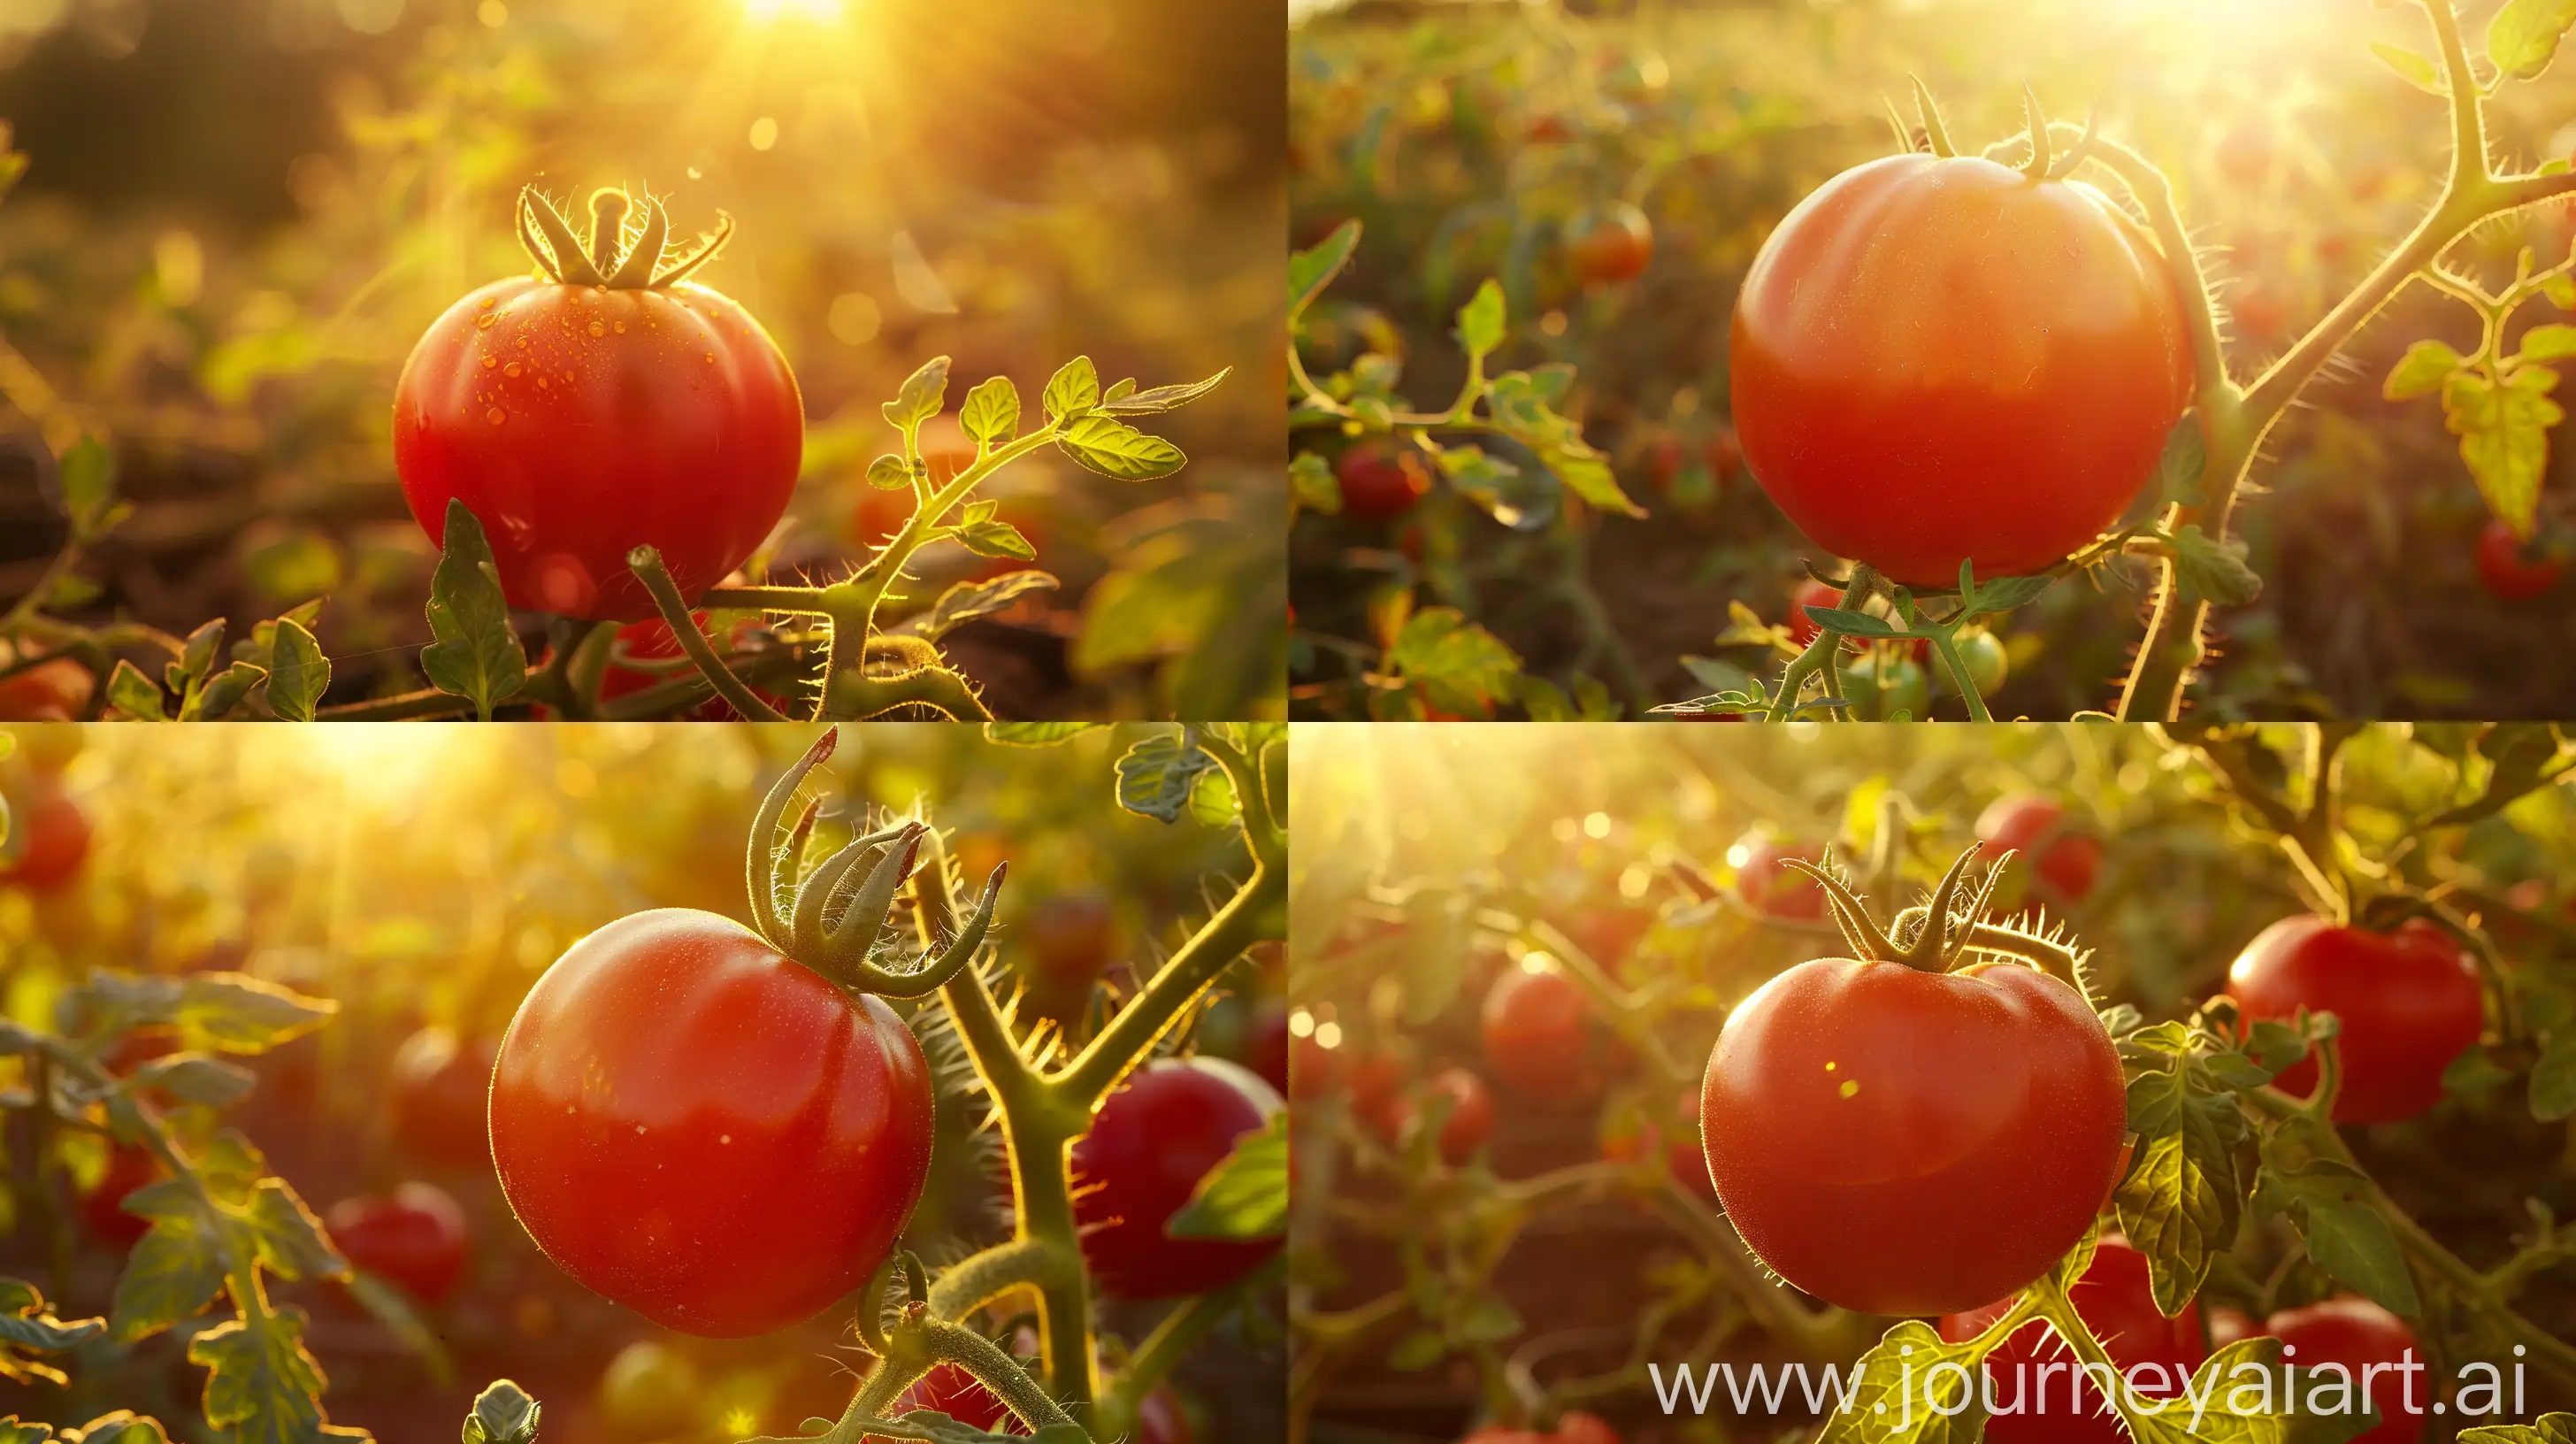 High detailed photo capturing a Tomato, Ensalada Hybrid. The sun, casting a warm, golden glow, bathes the scene in a serene ambiance, illuminating the intricate details of each element. The composition centers on a Tomato, Ensalada Hybrid. The tomatoes are about 3" long, 2½" across and plum-shaped. They are sweet and also make excellent sauces. Determinate and disease resistant plants.. The image evokes a sense of tranquility and natural beauty, inviting viewers to immerse themselves in the splendor of the landscape. --ar 16:9 